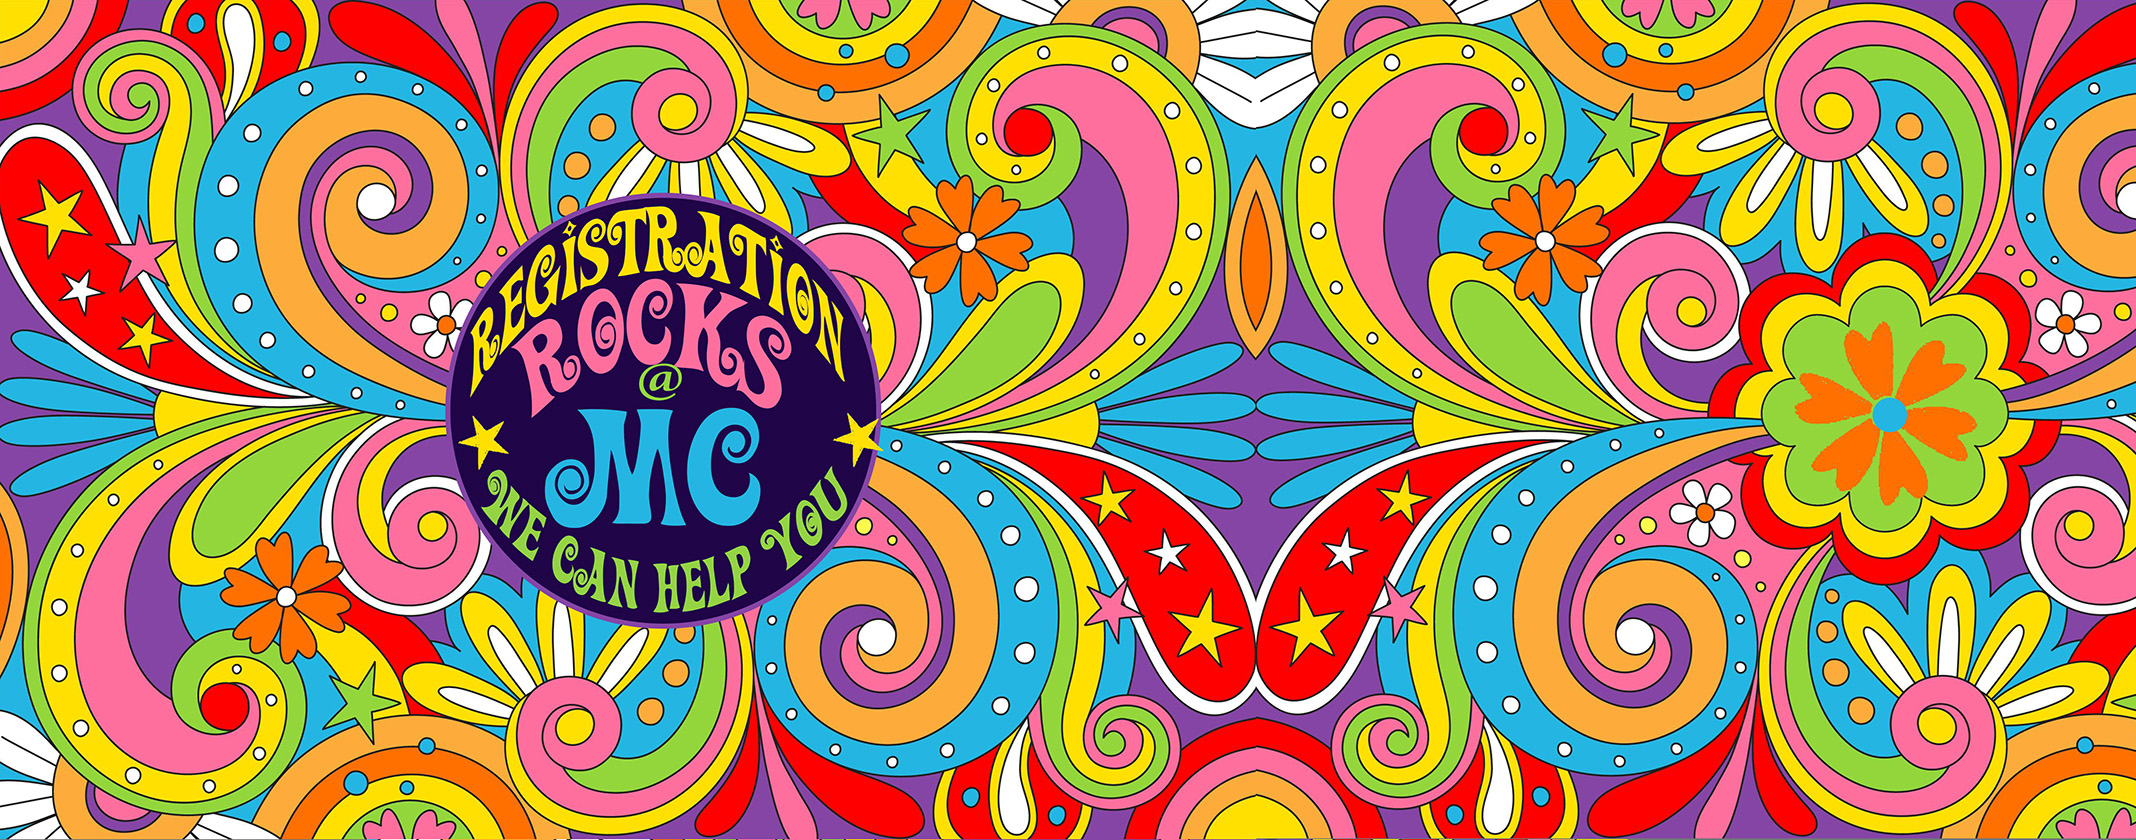 1960s psychedelic art style graphic with text in a circle that says "Registration Rocks @ MC. We can help you"